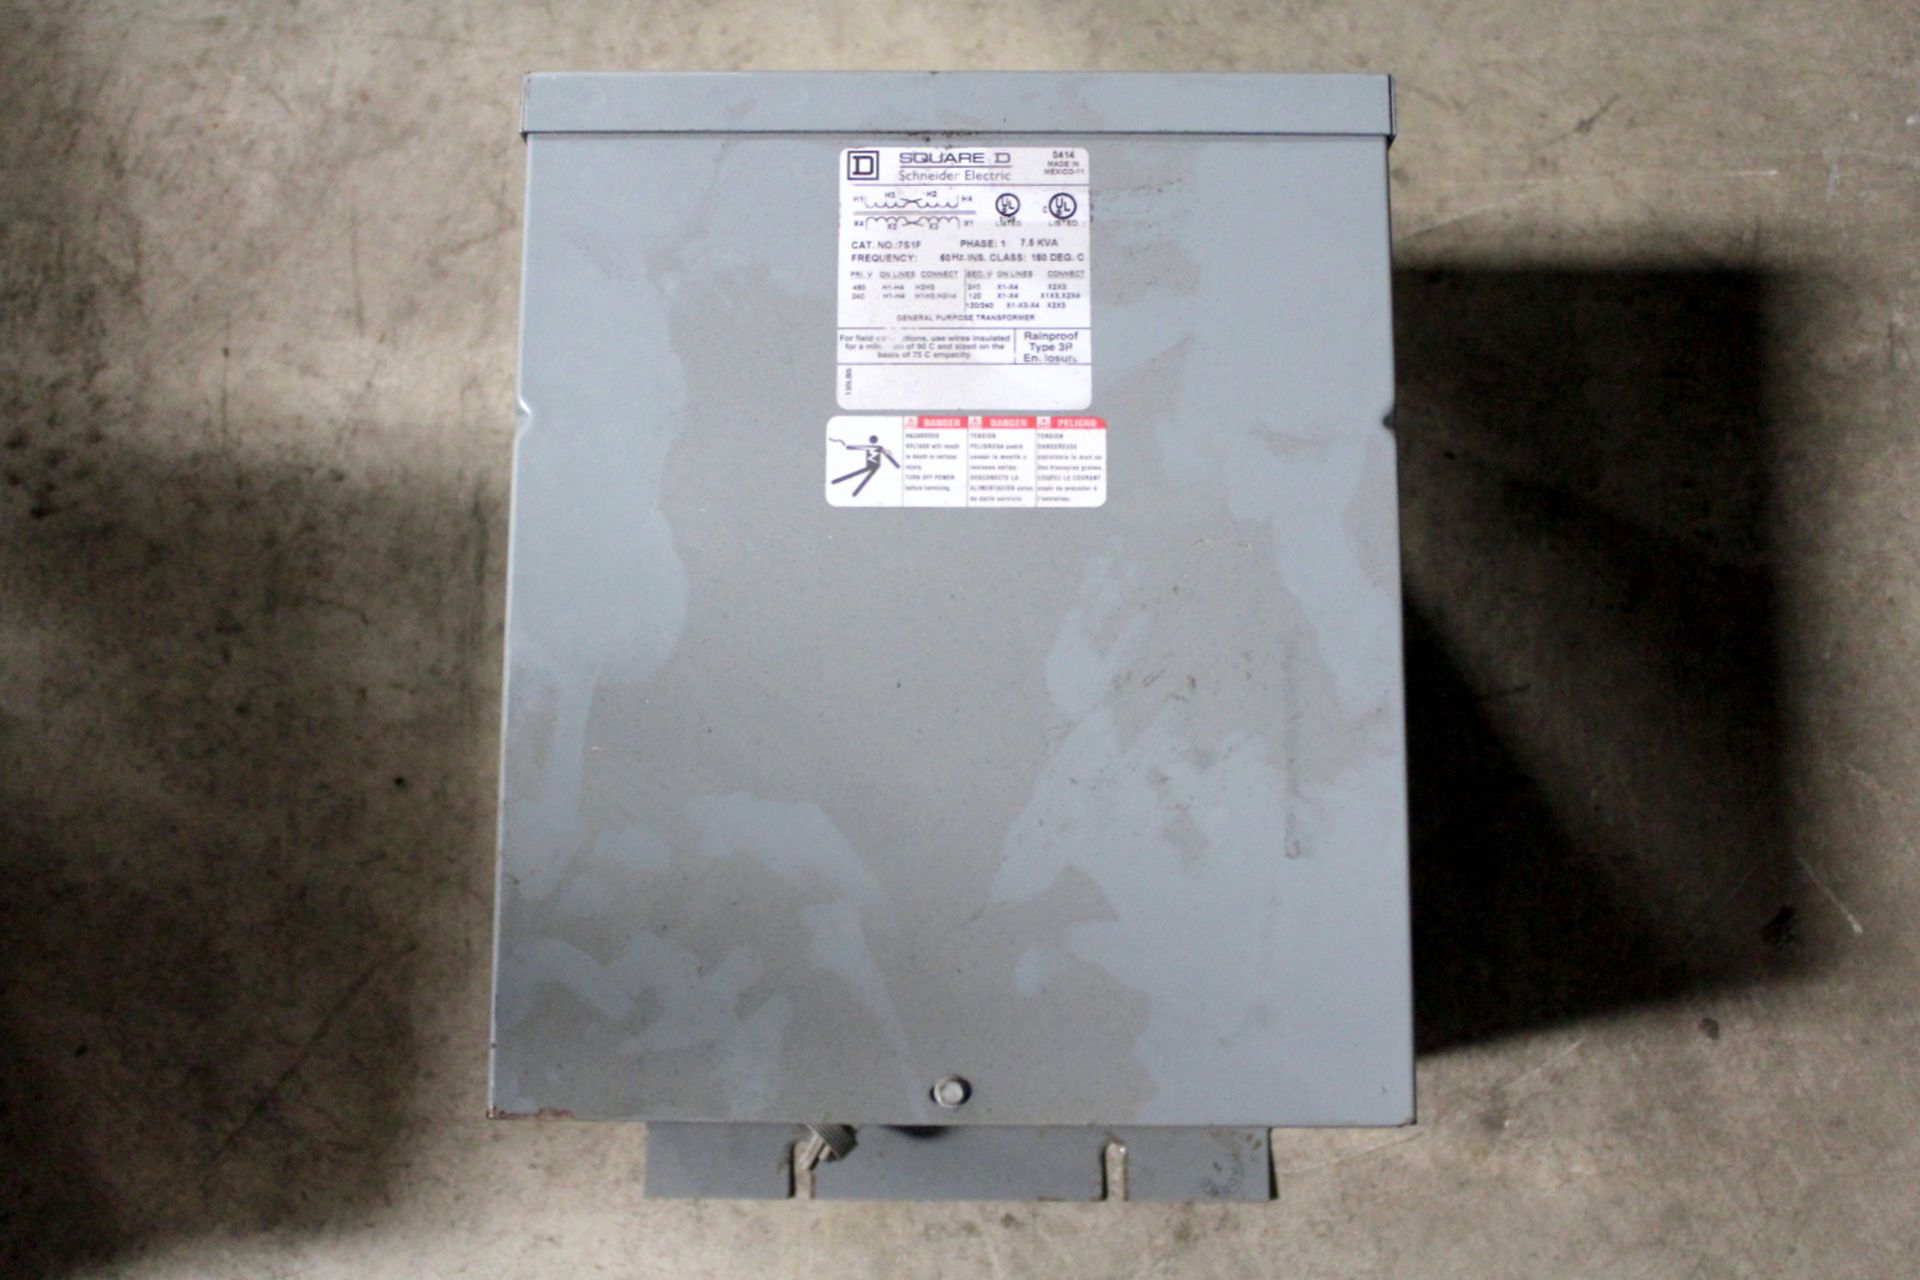 Square D Cat. No. 7S1F Transformer, 7.5KVA, Single Phase (All Items MUST be Removed by Thursday,